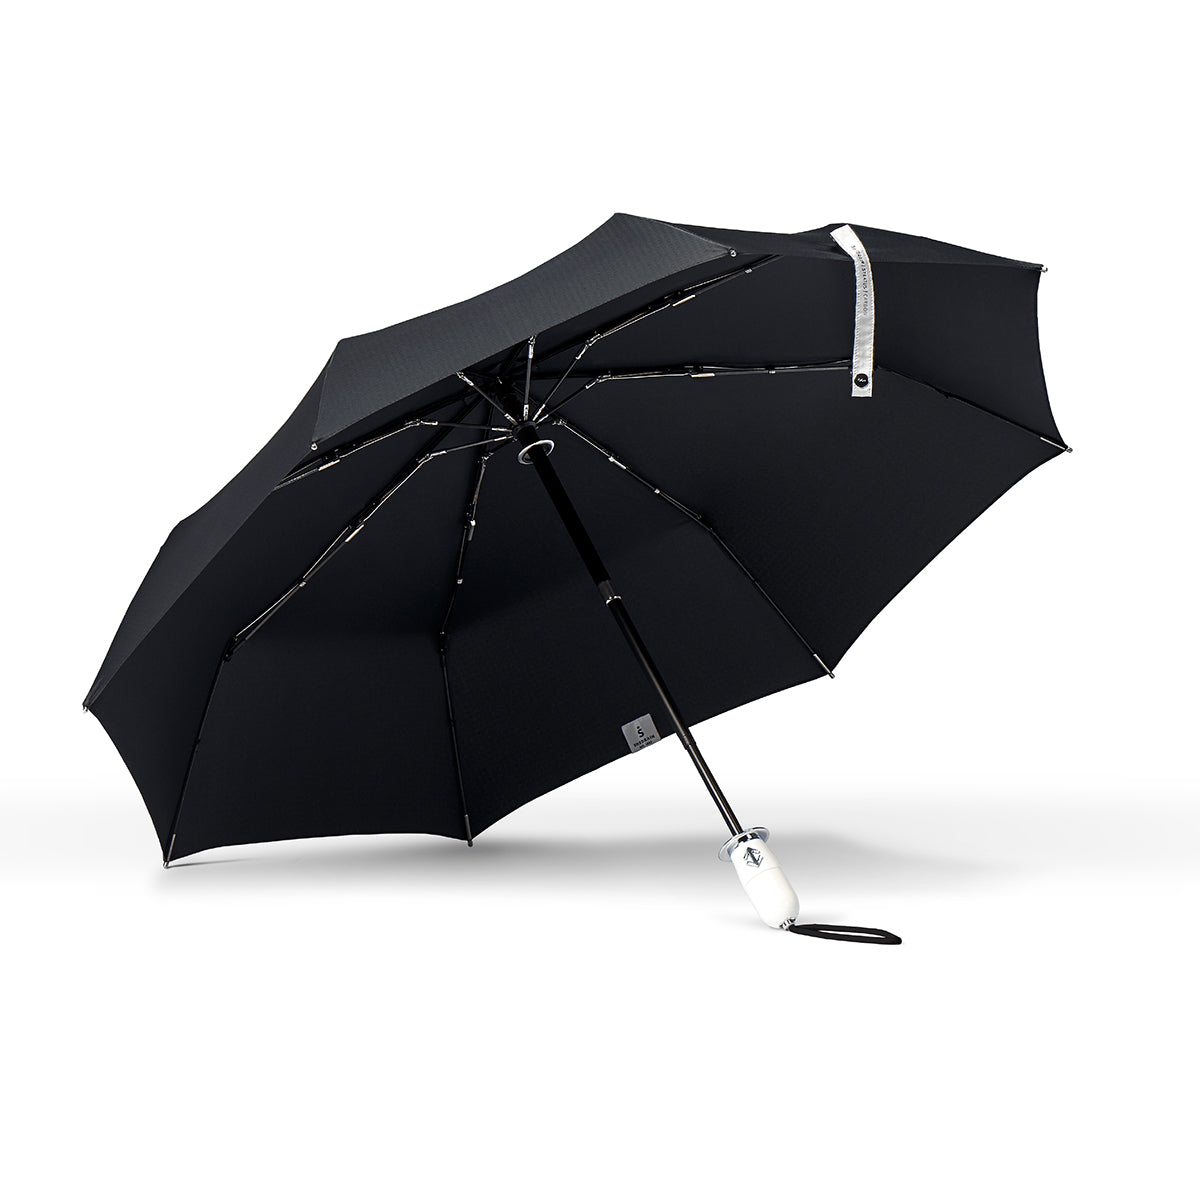 Underside view of a high end compact black umbrella with chrome details and a shiny white handle